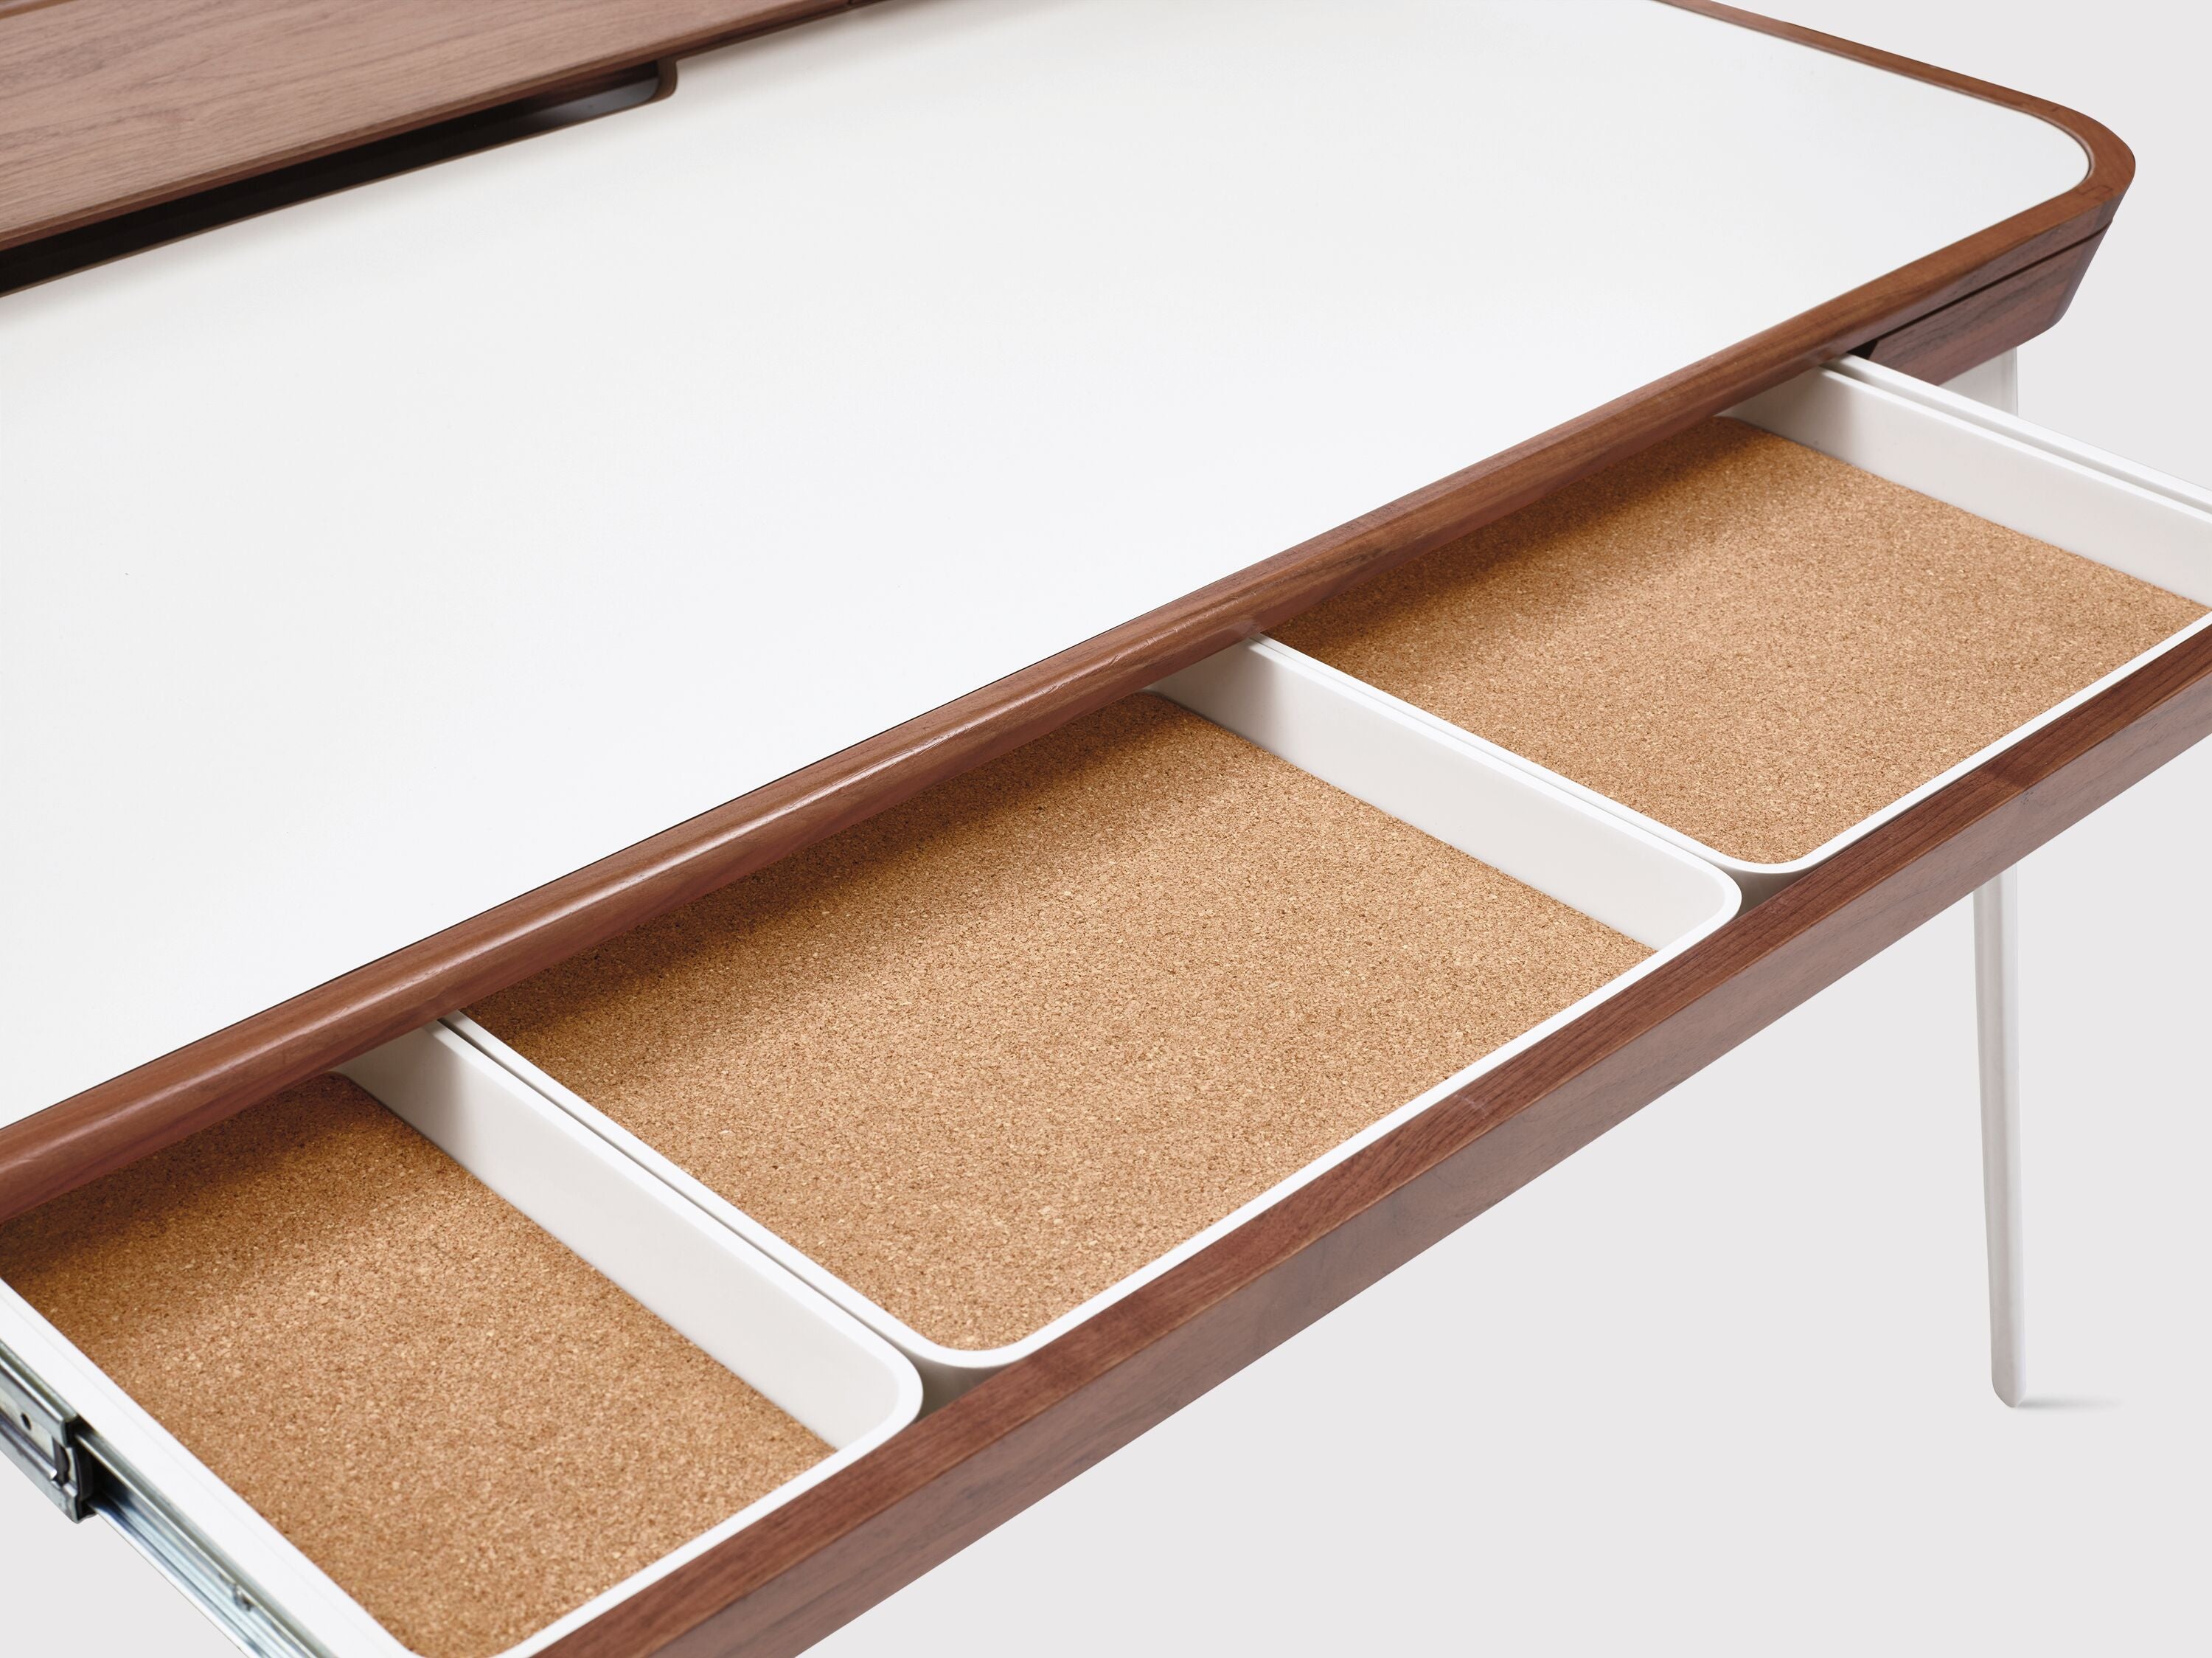 Center drawer is outfitted with removable cork-lined organizers.